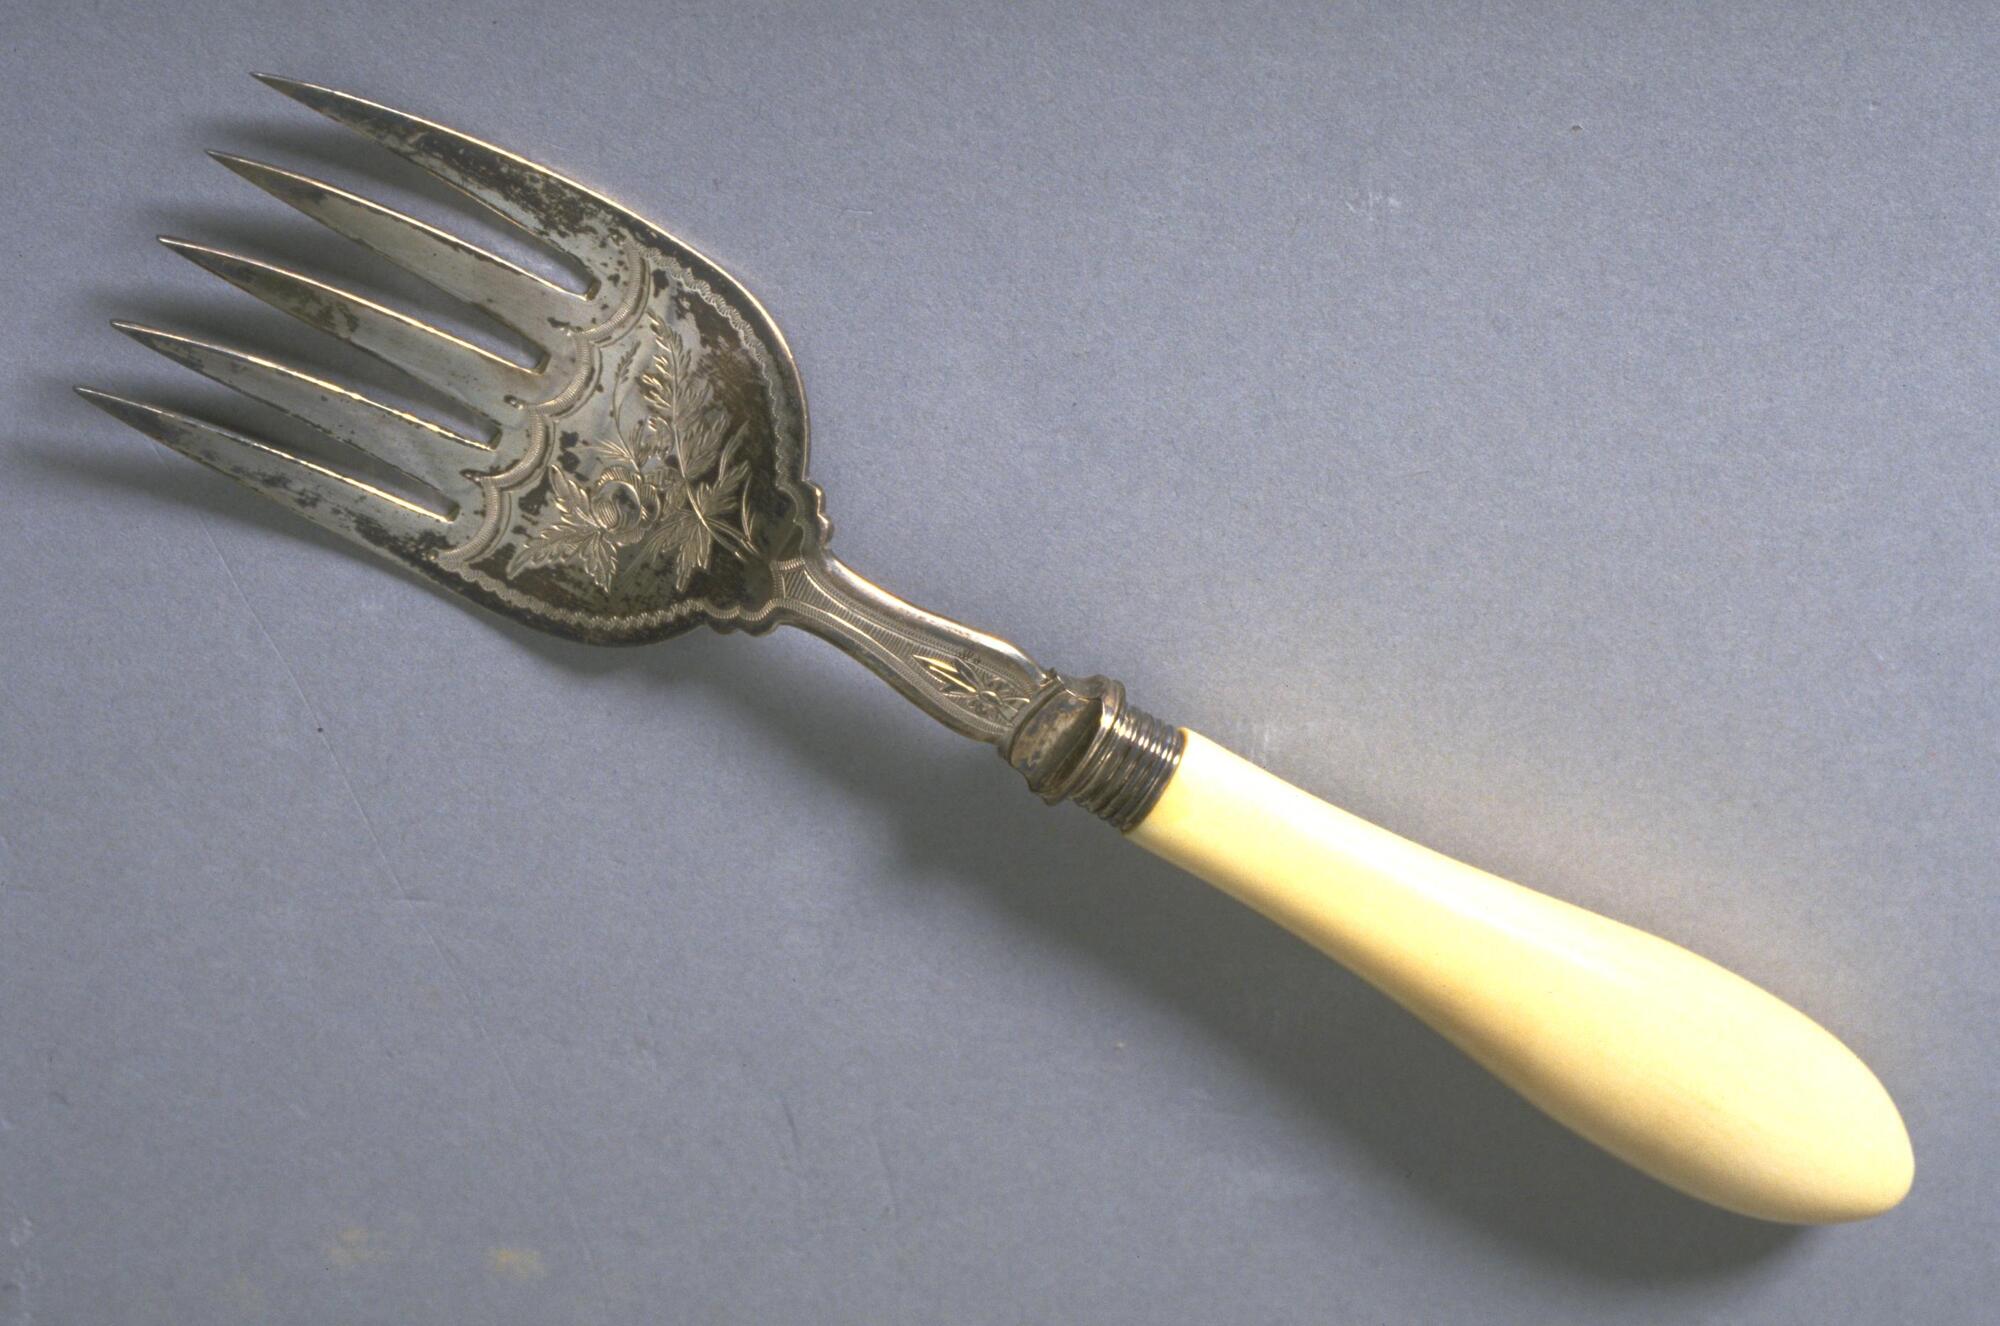 Five-tined engraved silver fork with ivory handle